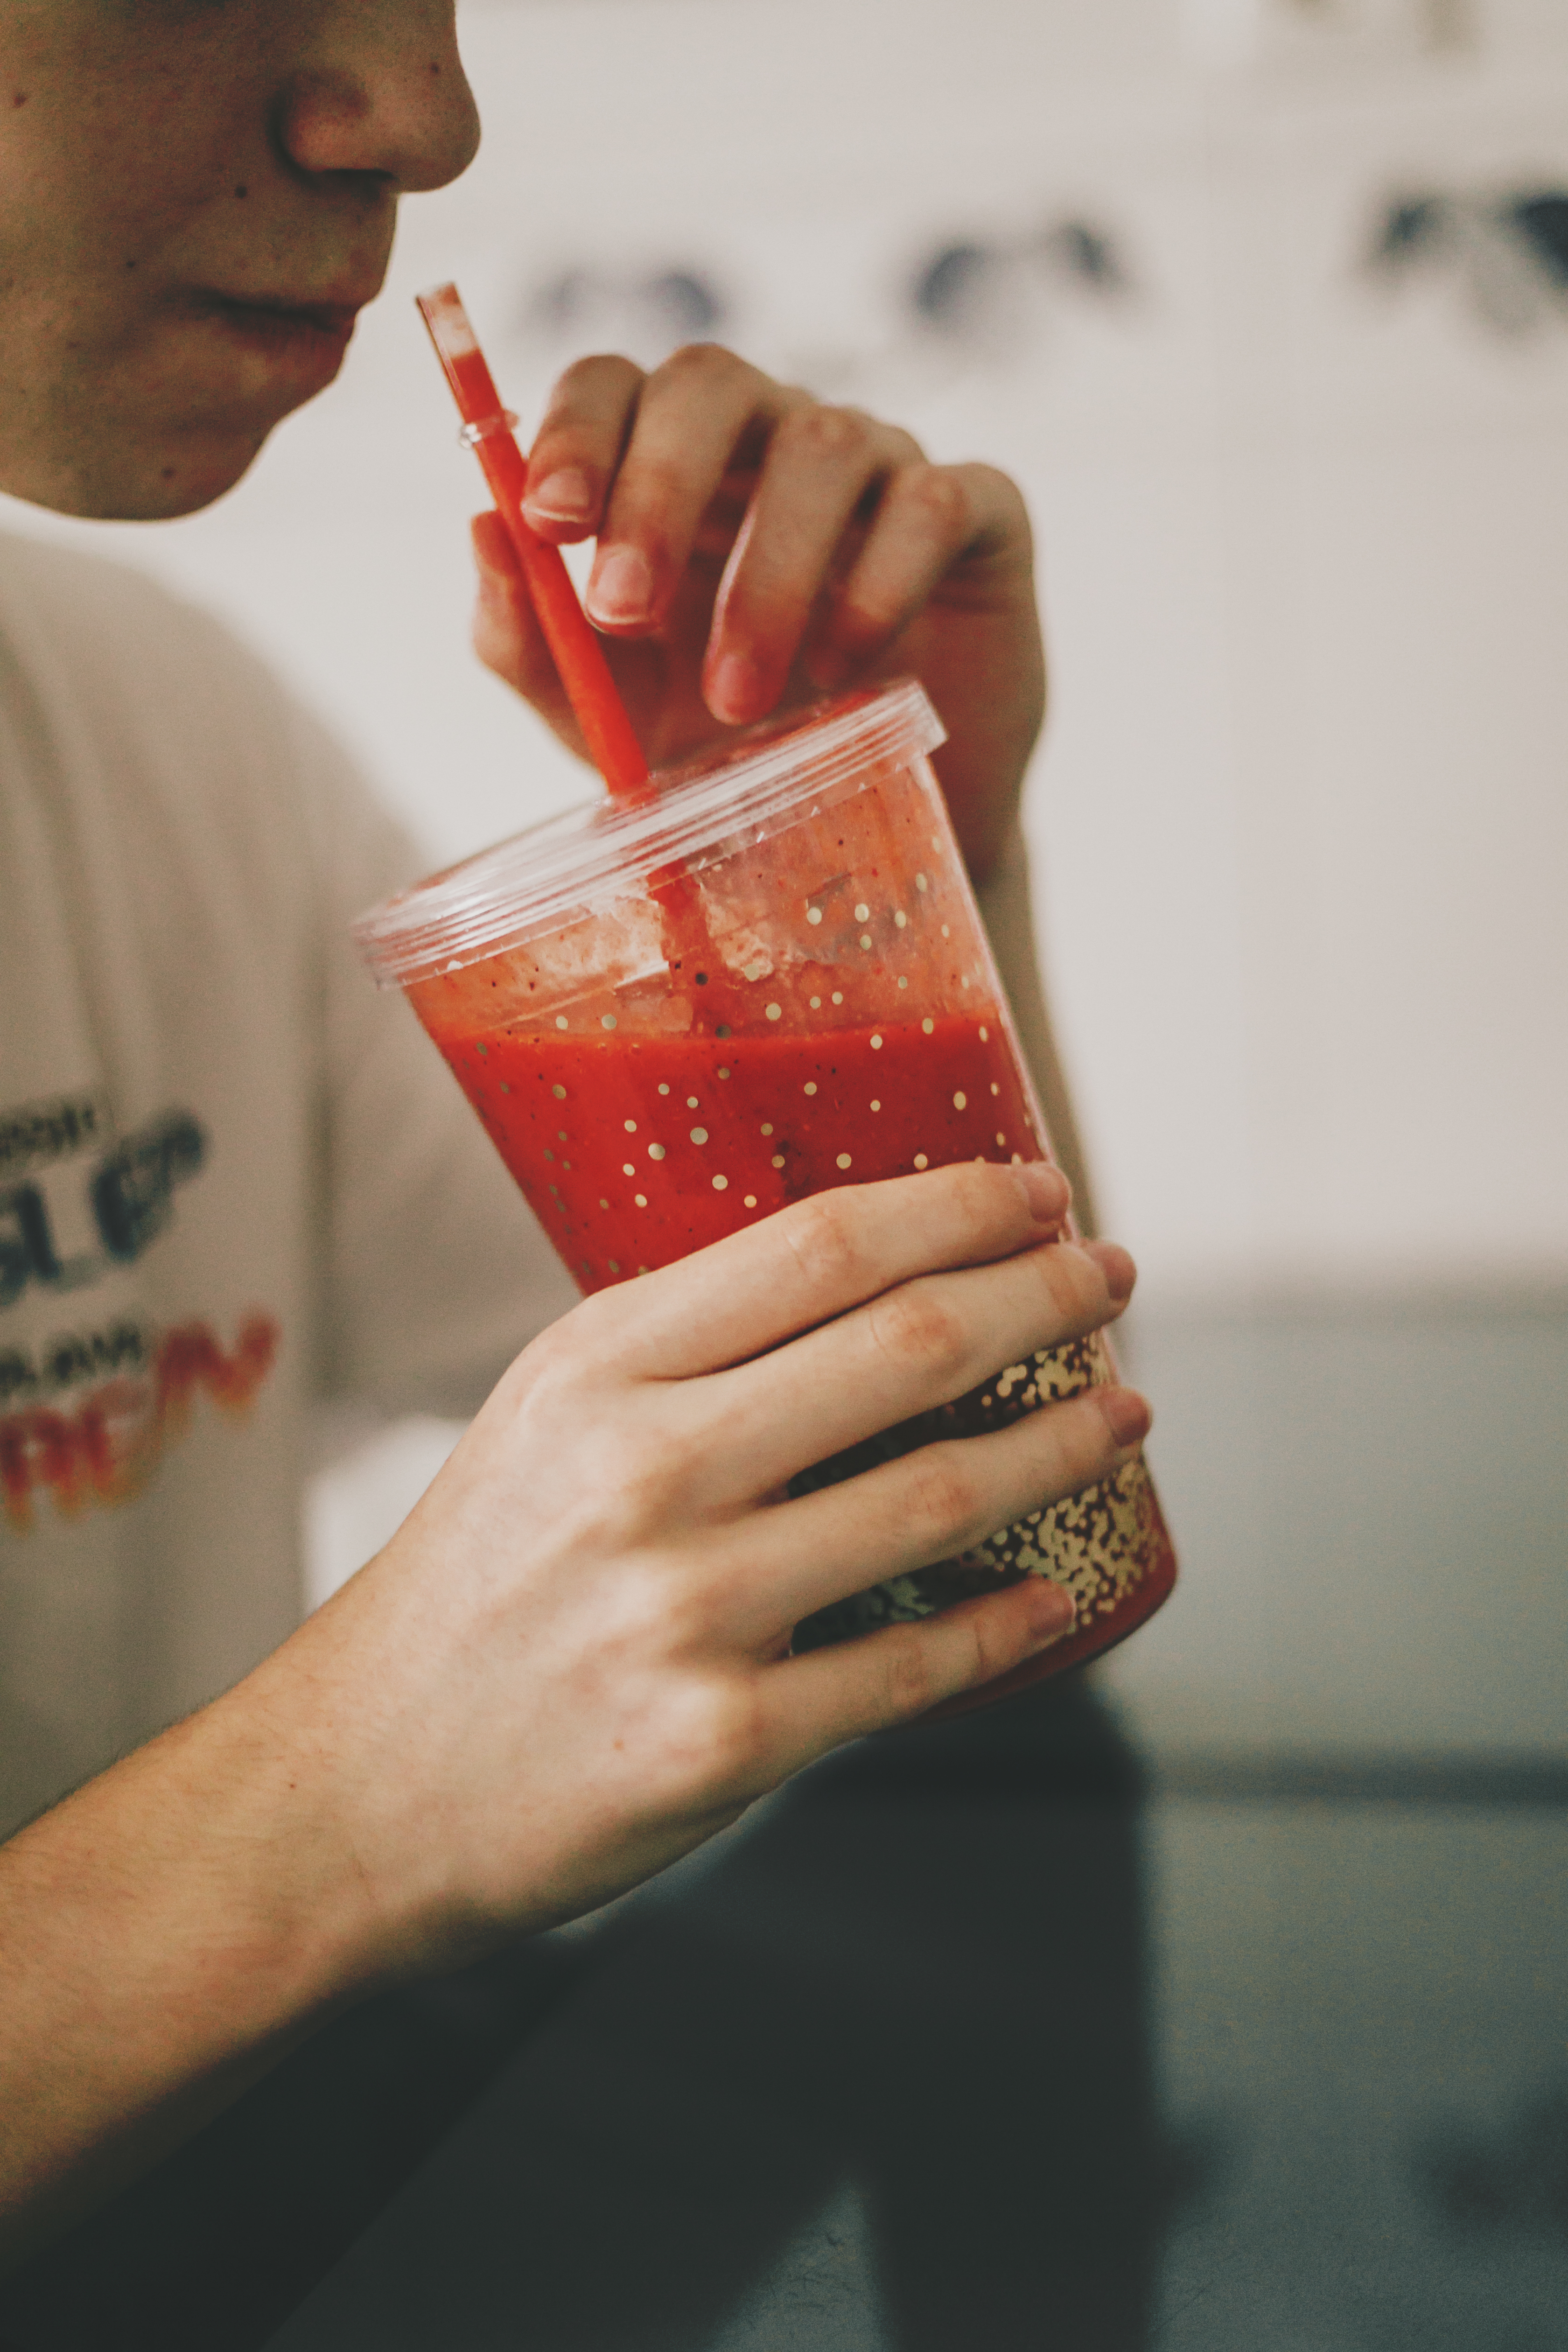 An image of a man holding a drinks tumbler with red liquid and a straw in it.